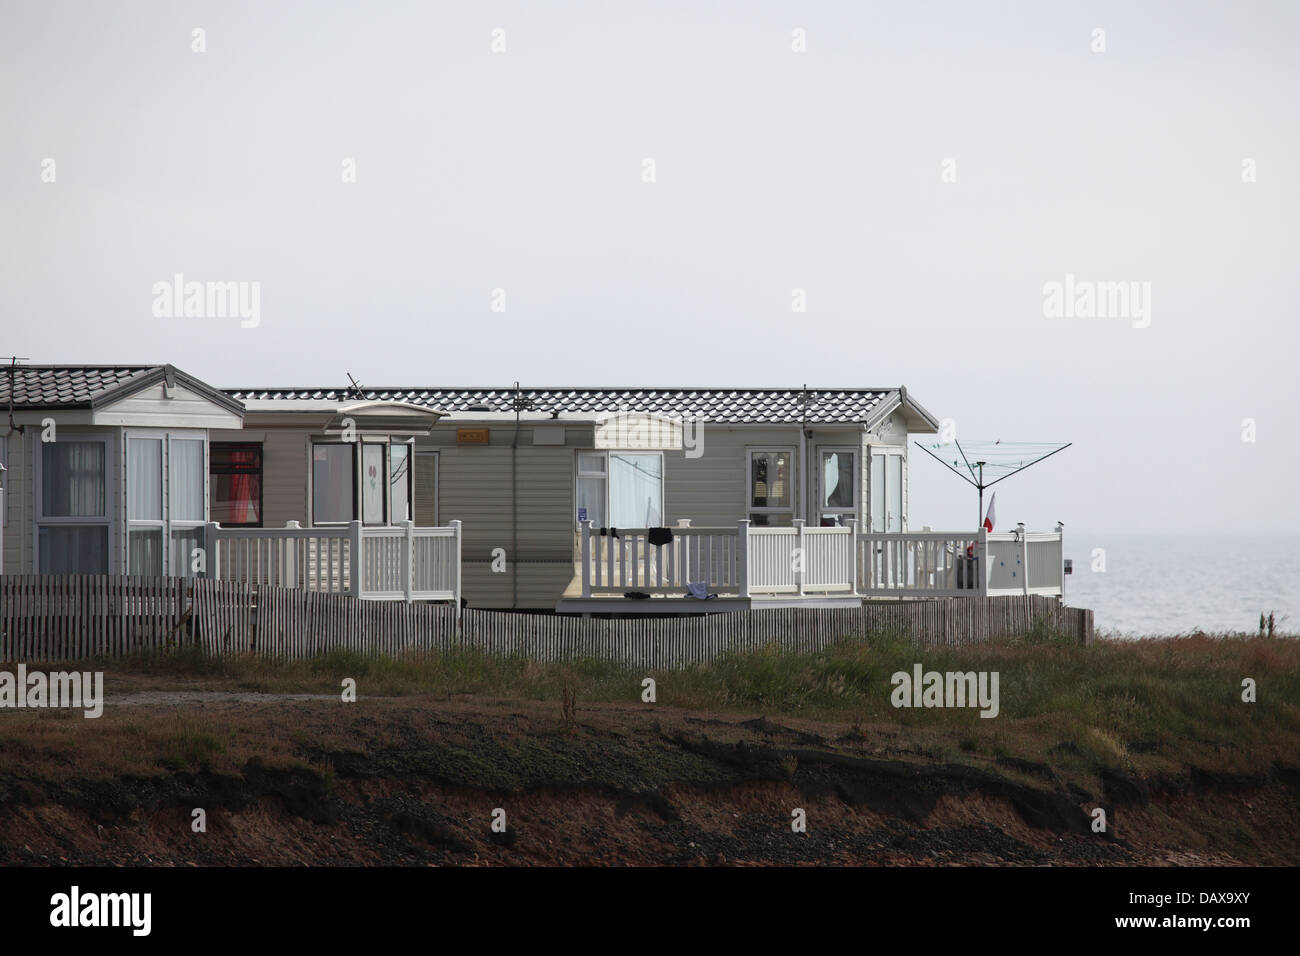 Caravans at Newbiggin-by-the-Sea in Northumberland, England. Stock Photo